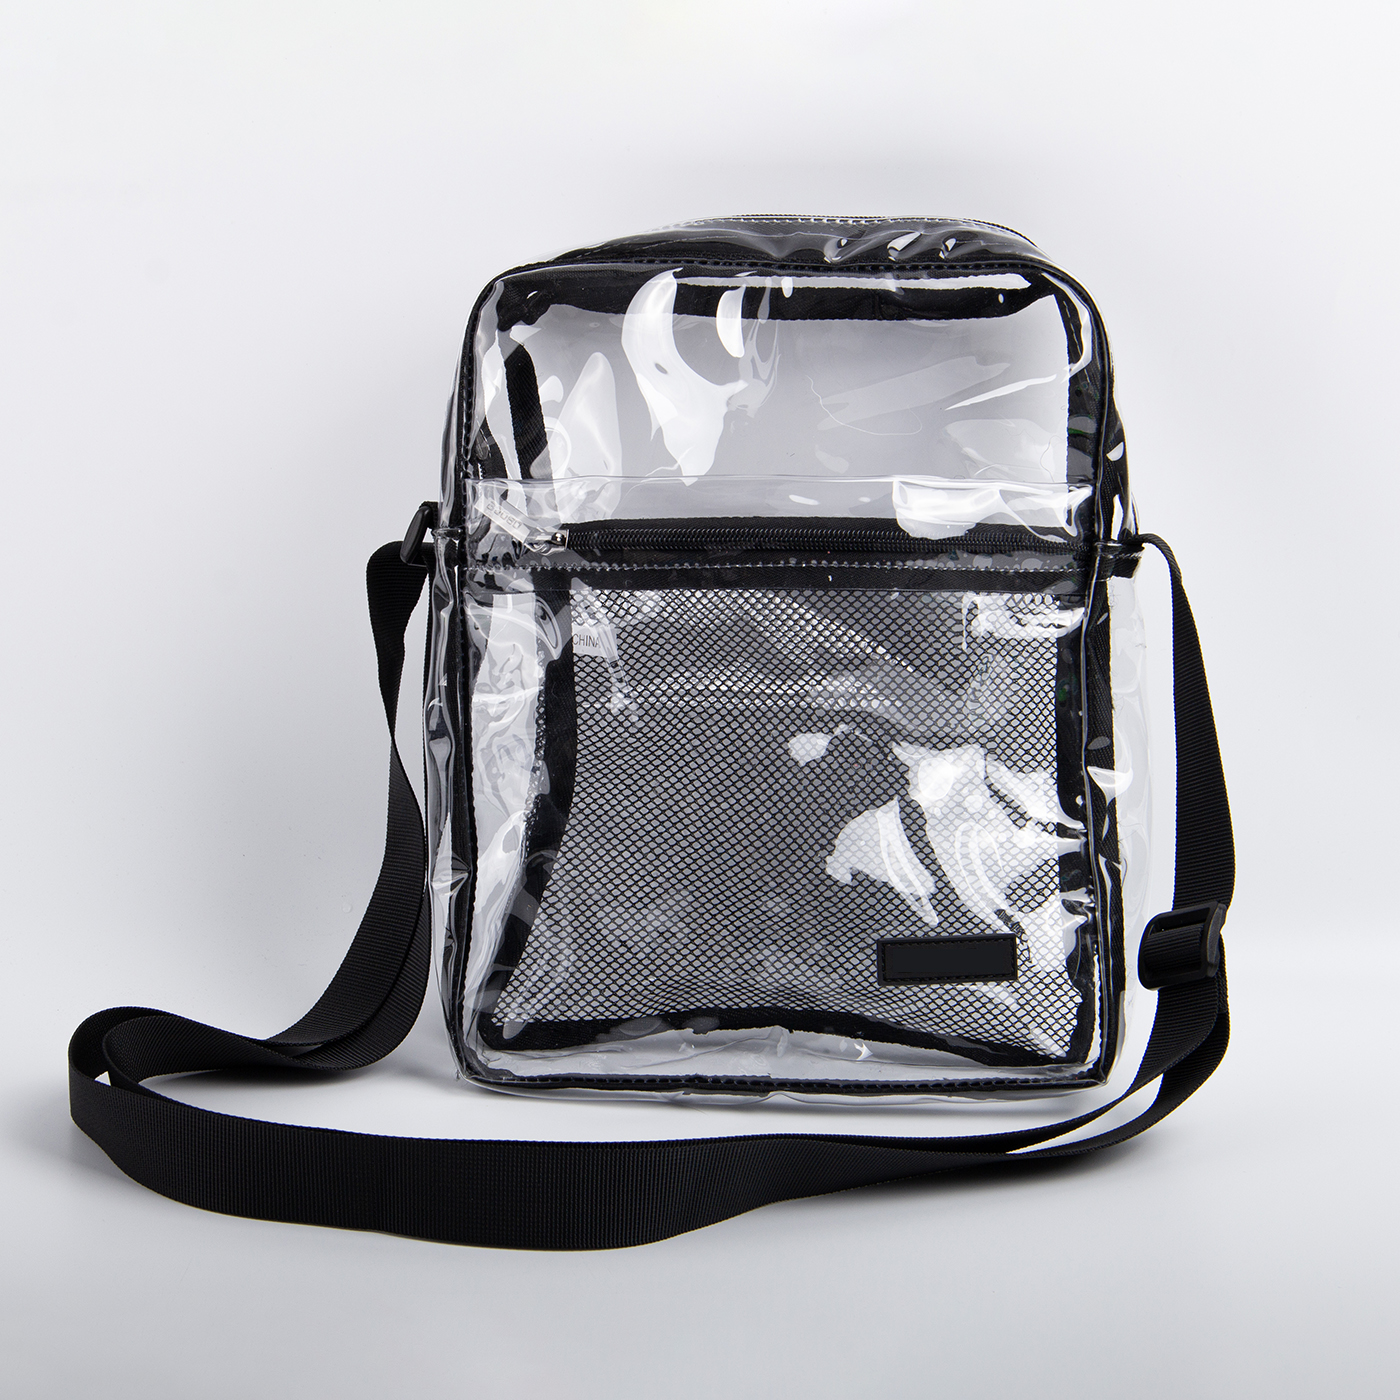 Clear Messenger Bag With Mesh Compartment2